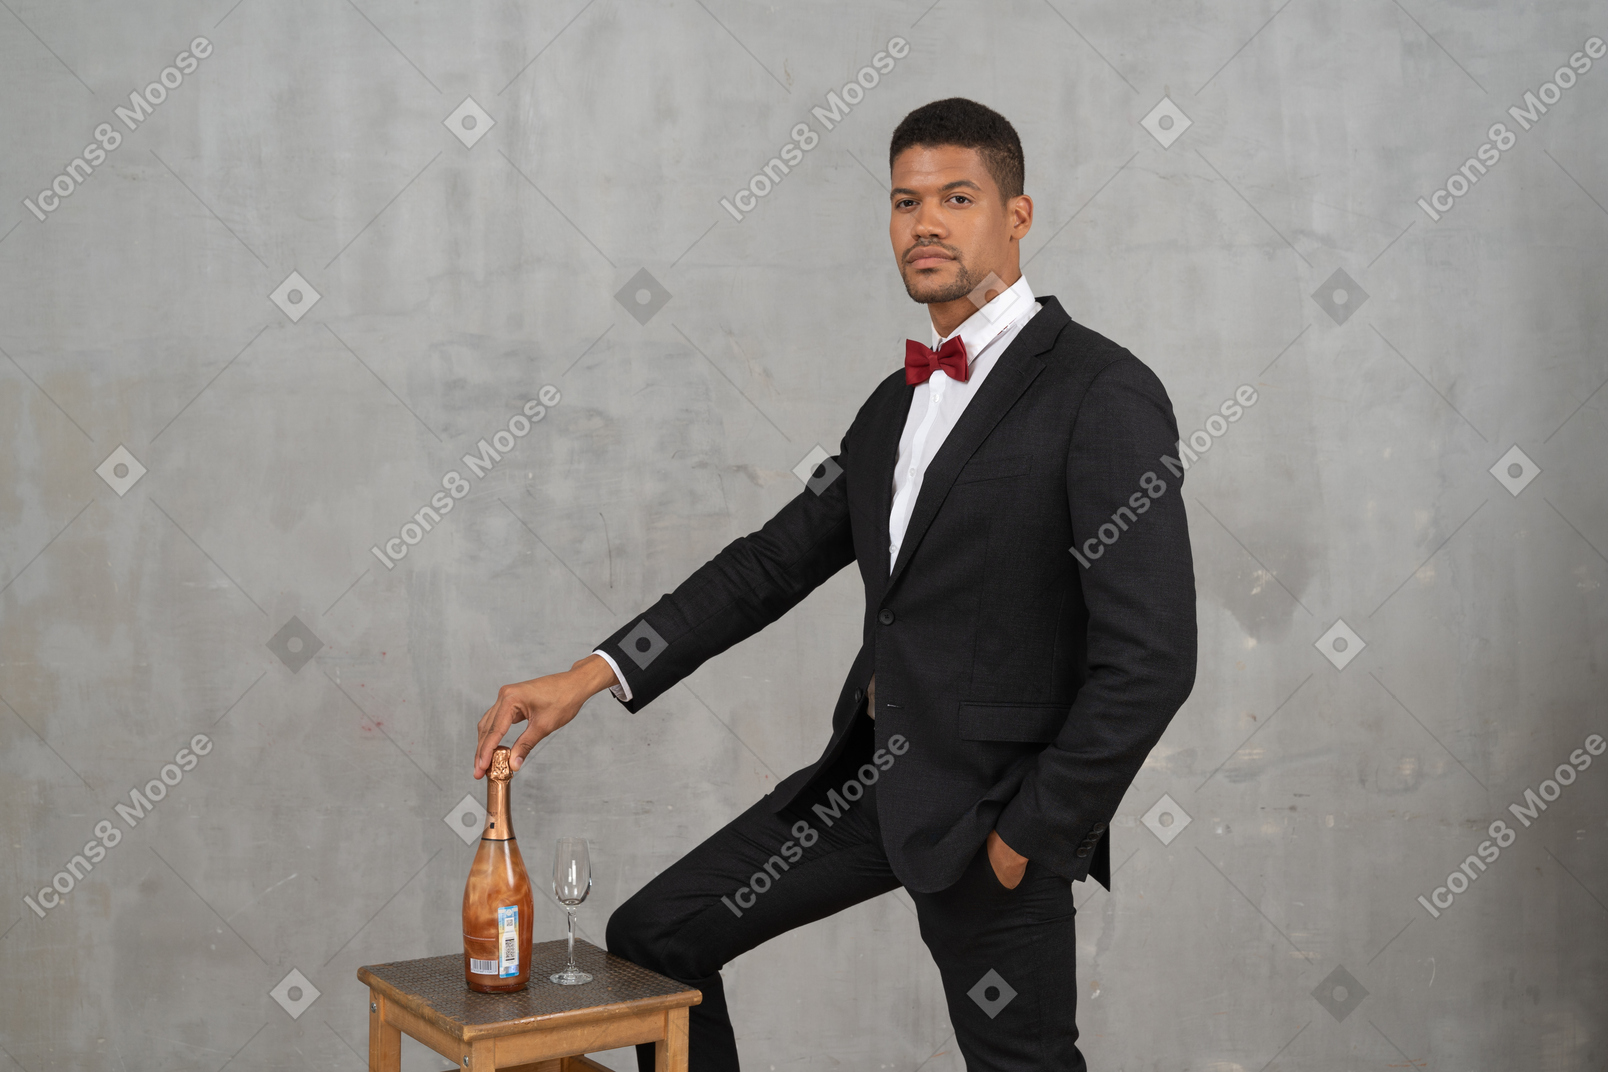 Man standing next to a champagne bottle and glass